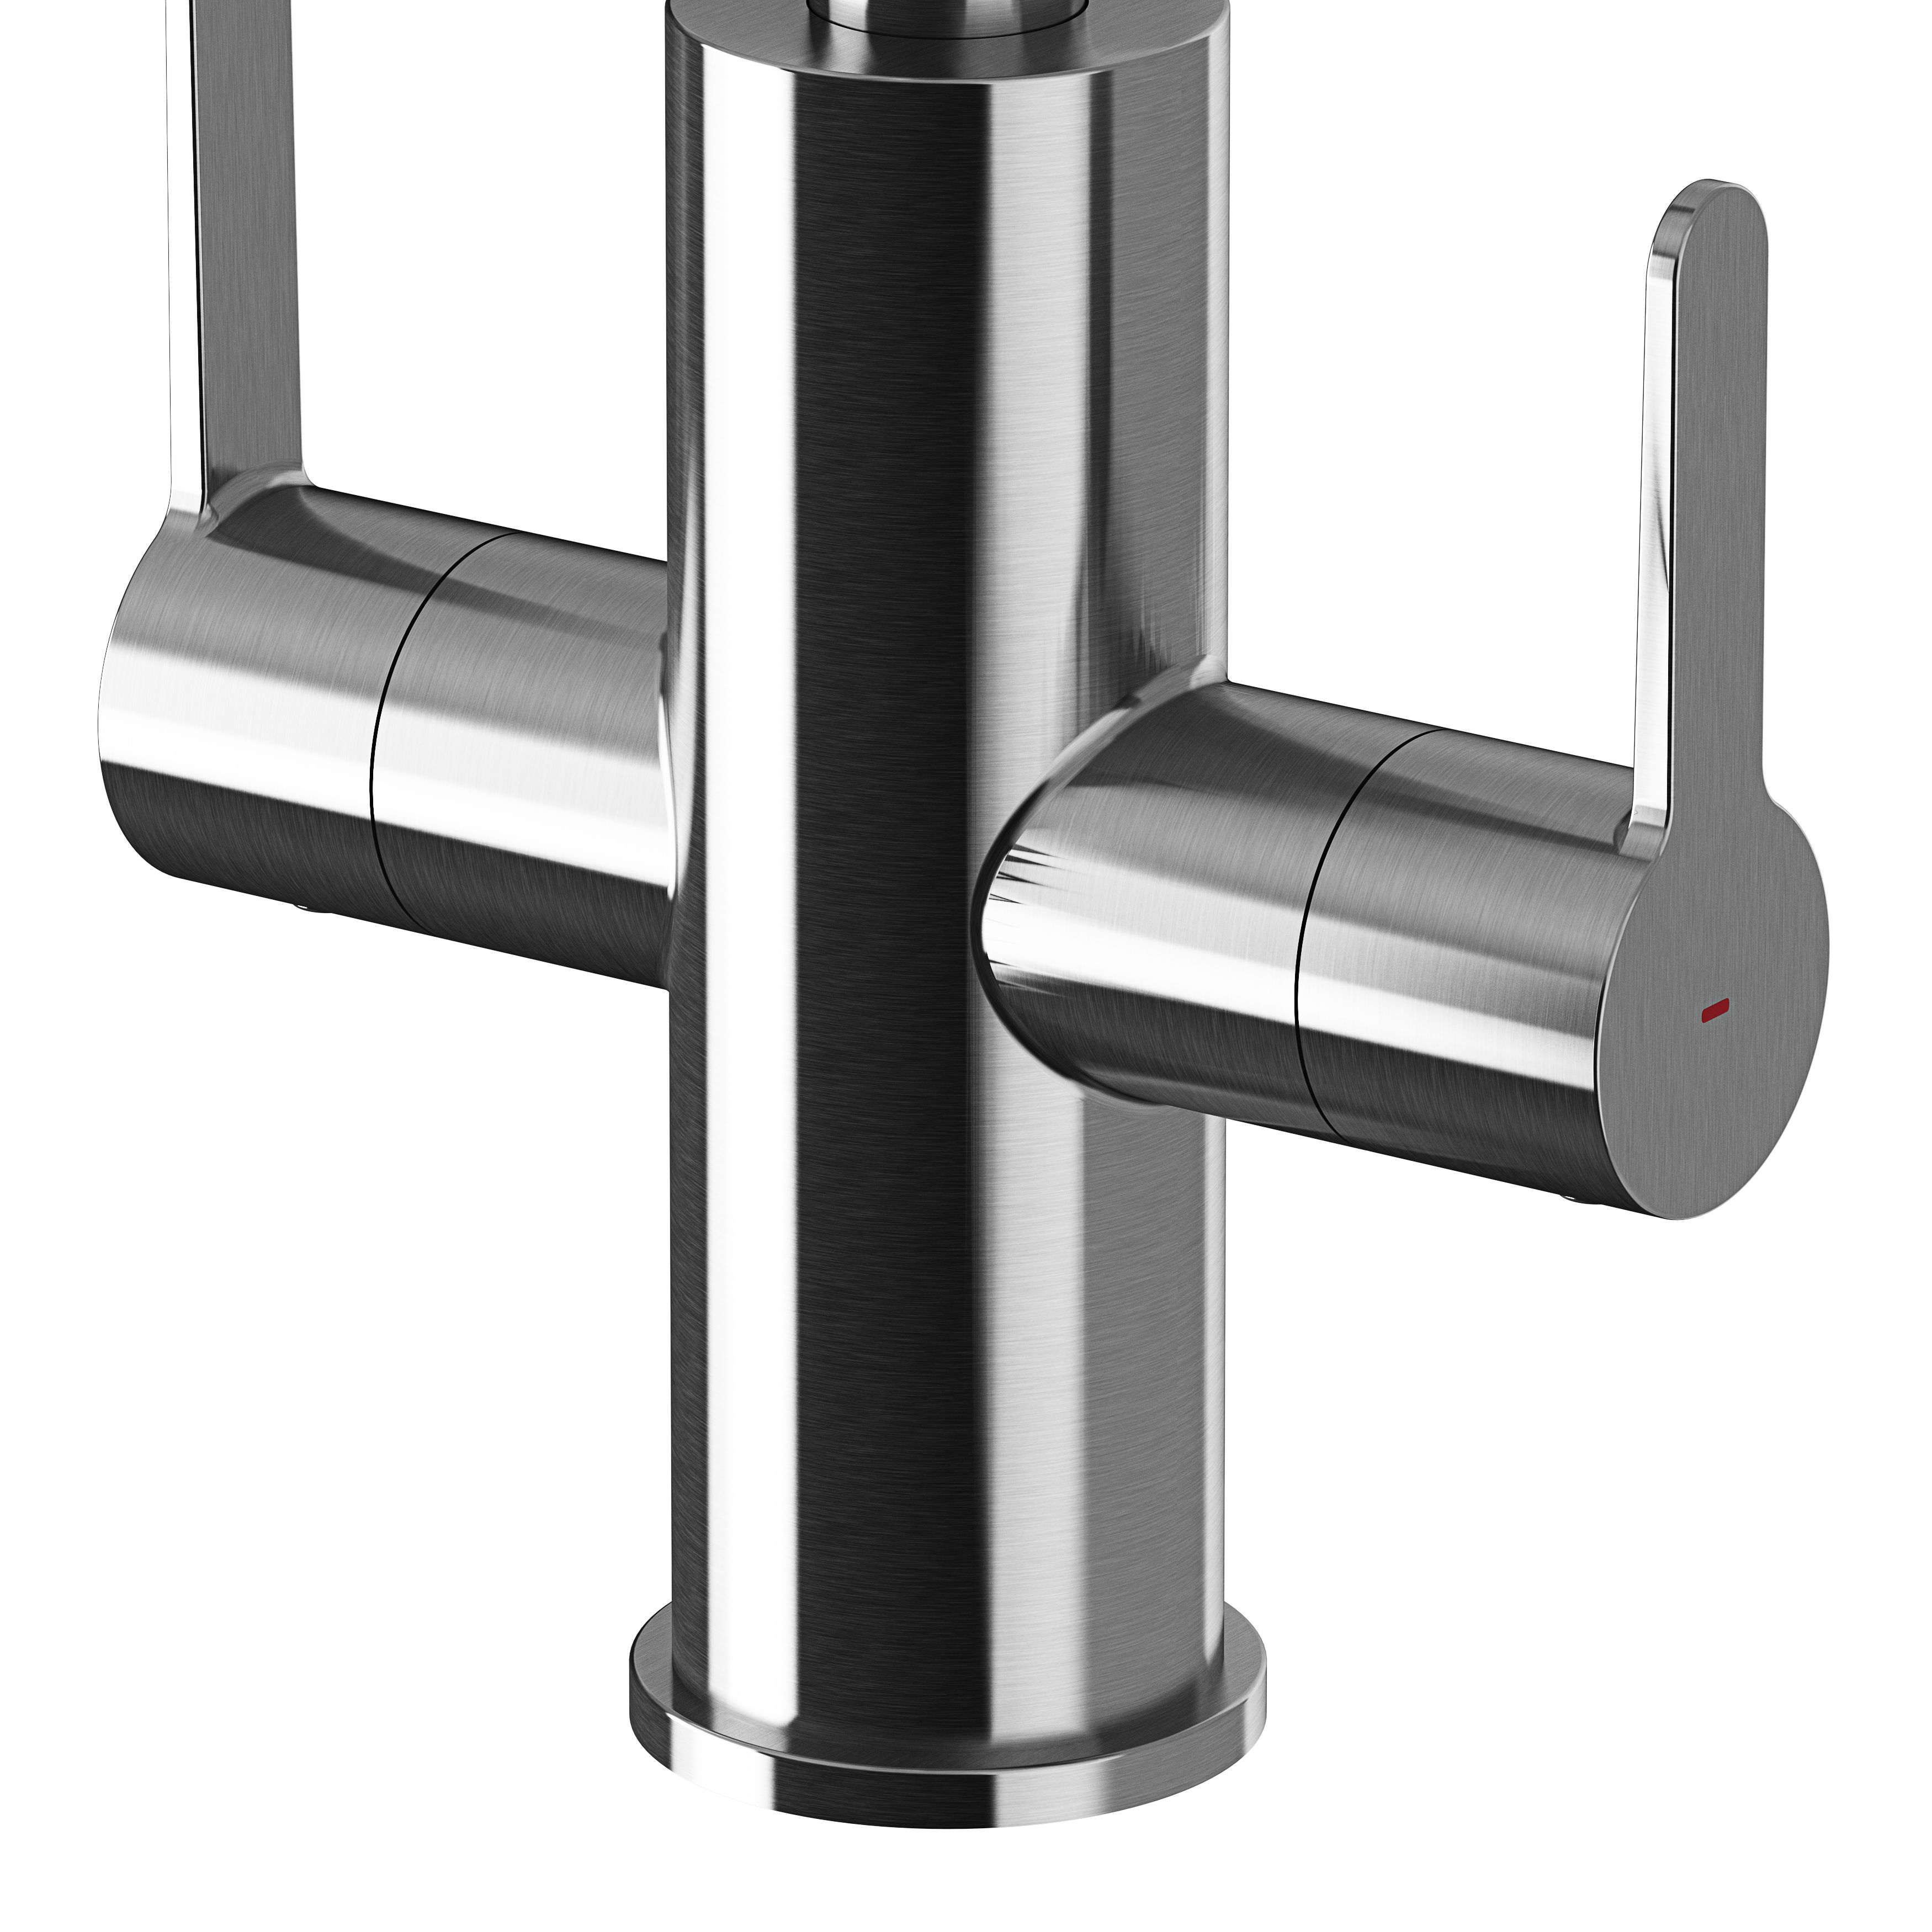 GoodHome Zanthe Stainless steel effect Kitchen Twin lever Tap